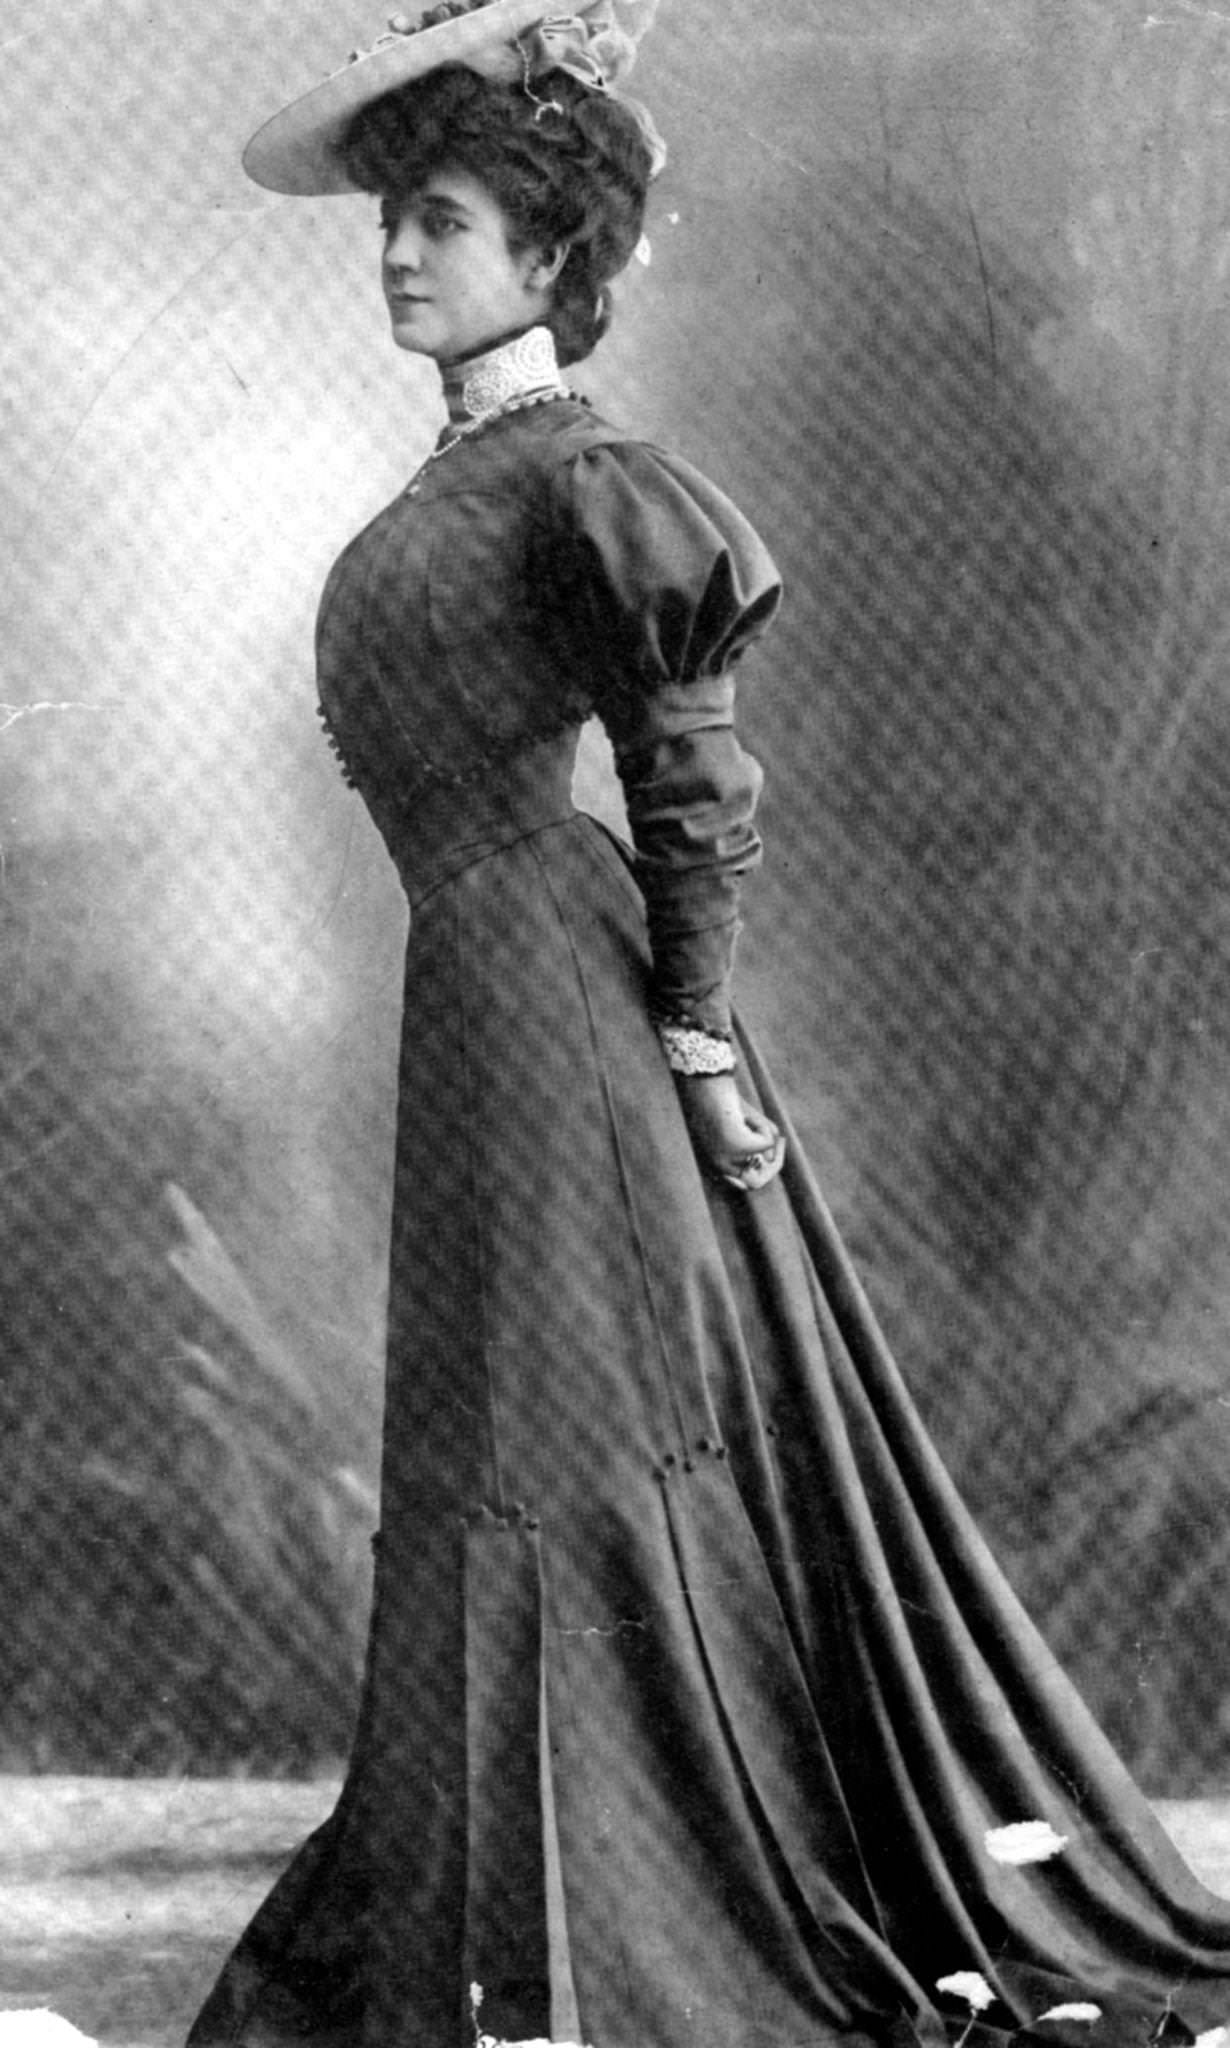 Miss Mansfield wears a coatdress with lace detail and full sleeves, complete with a feather-trimmed hat